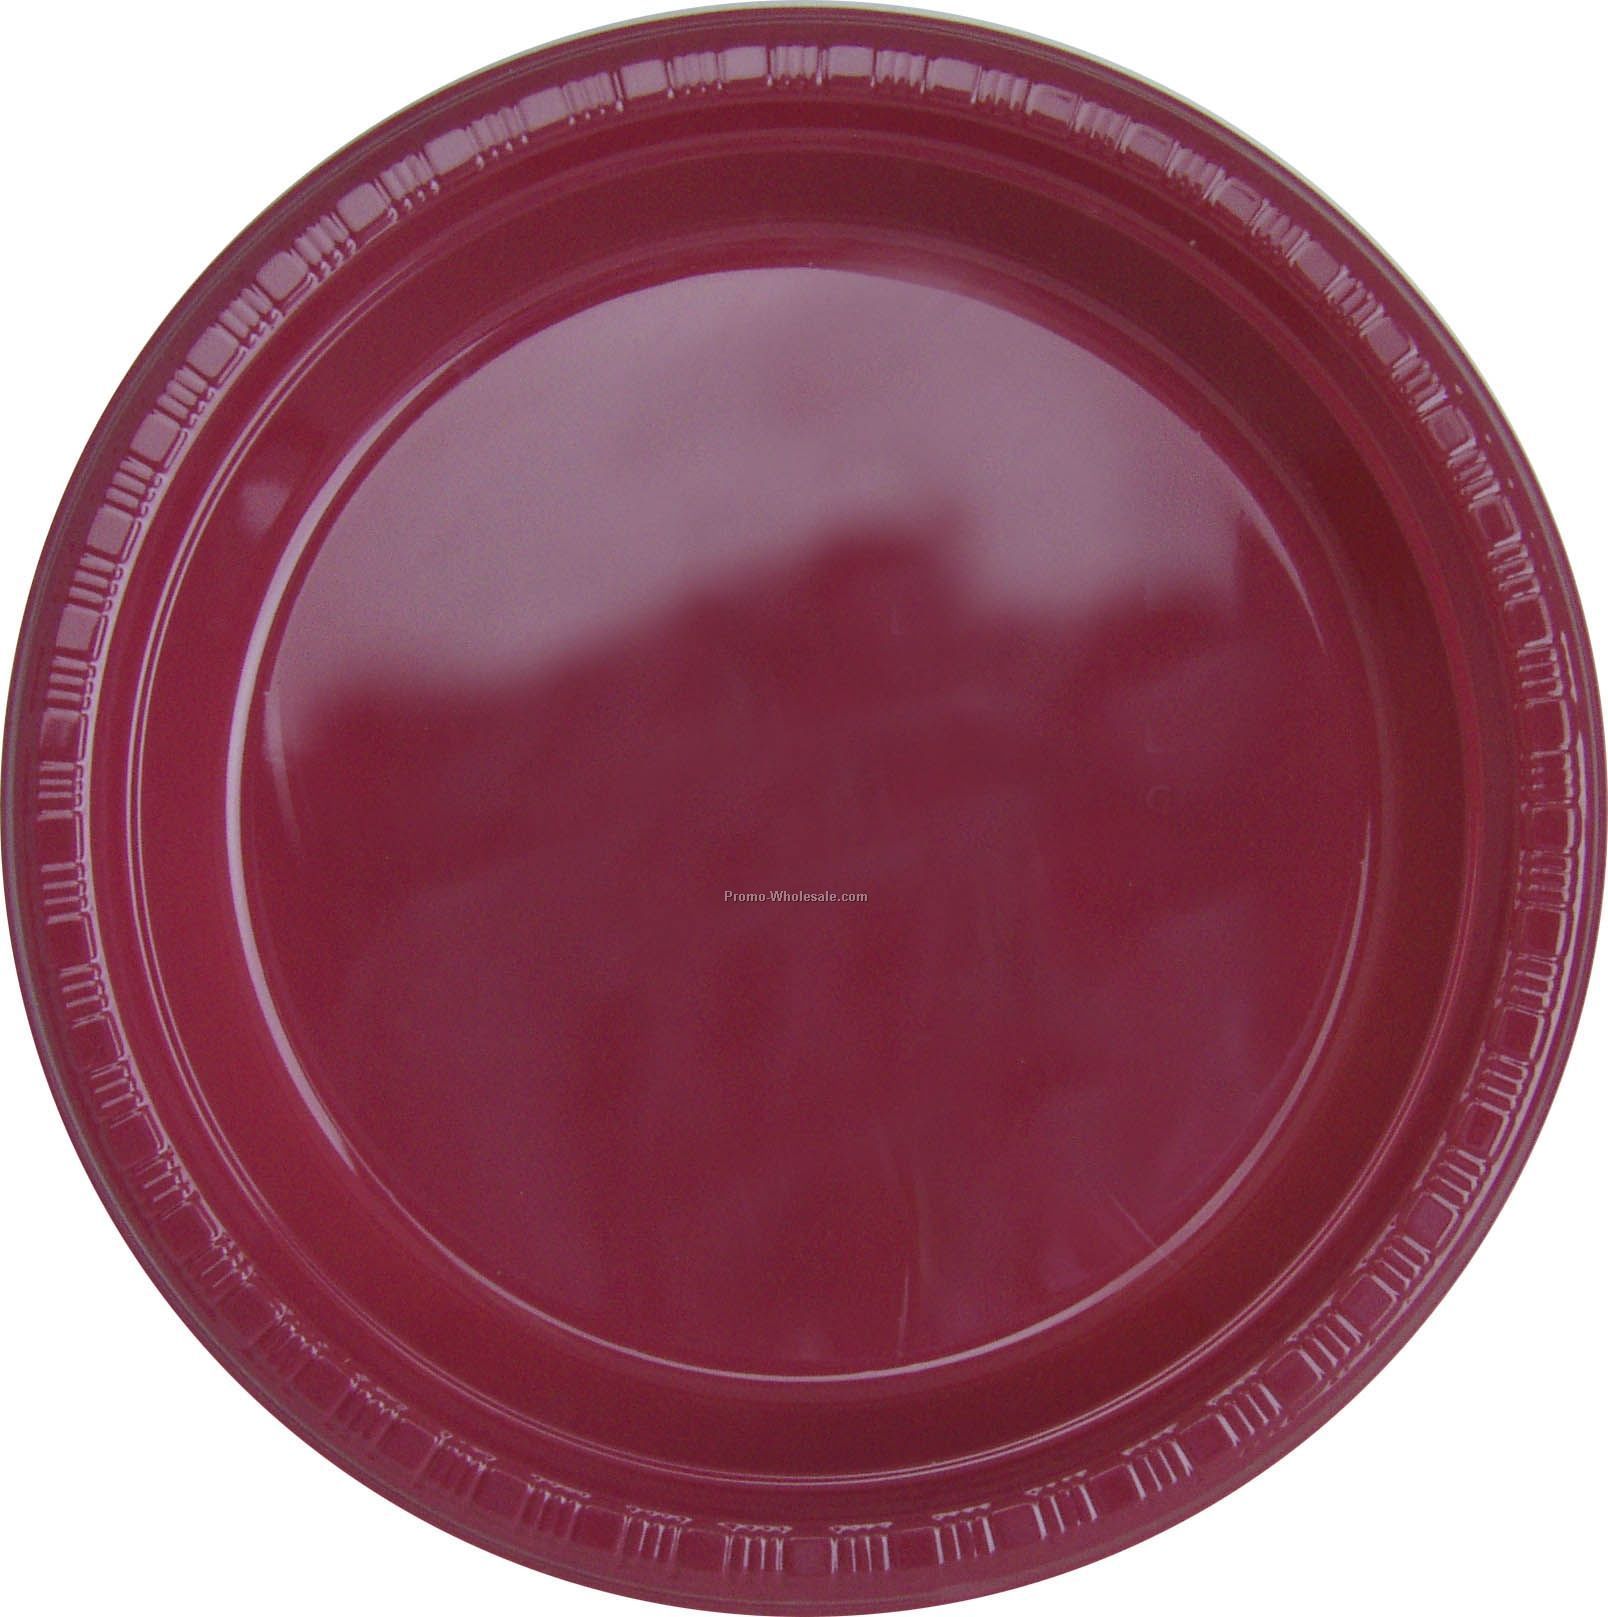 9" Burgundy Royale Red Colorware Paper Plate